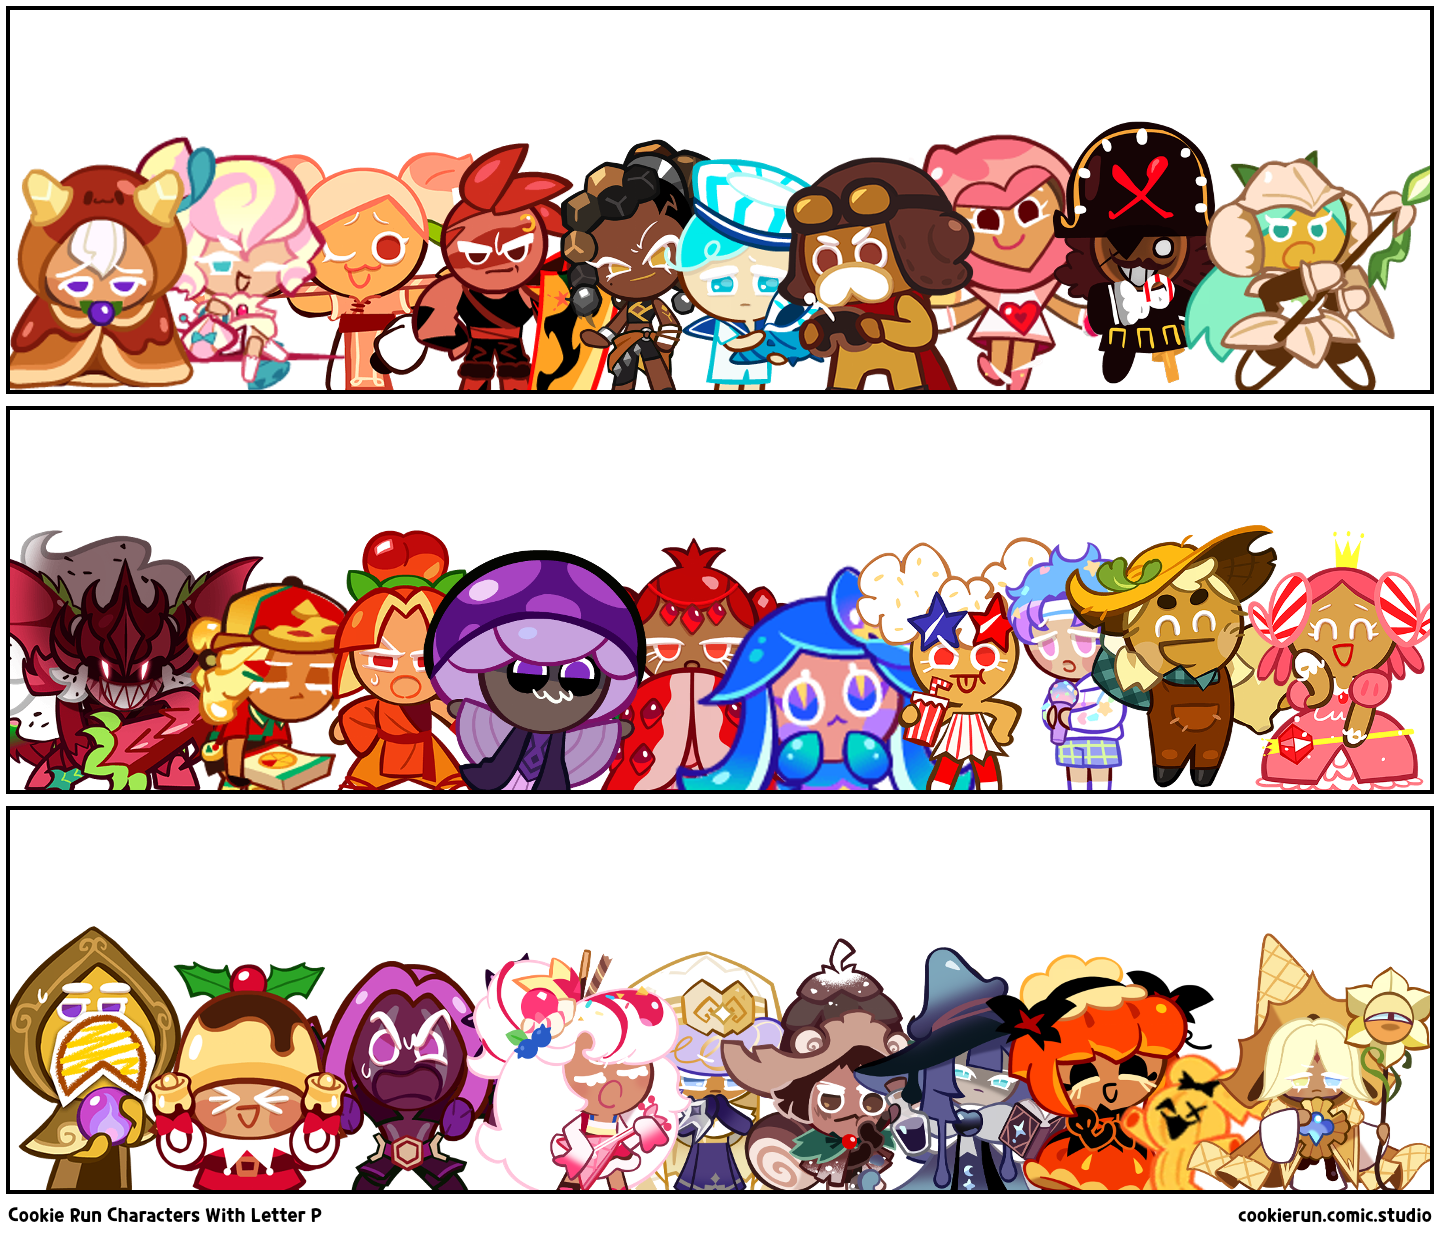 Cookie Run Characters With Letter P